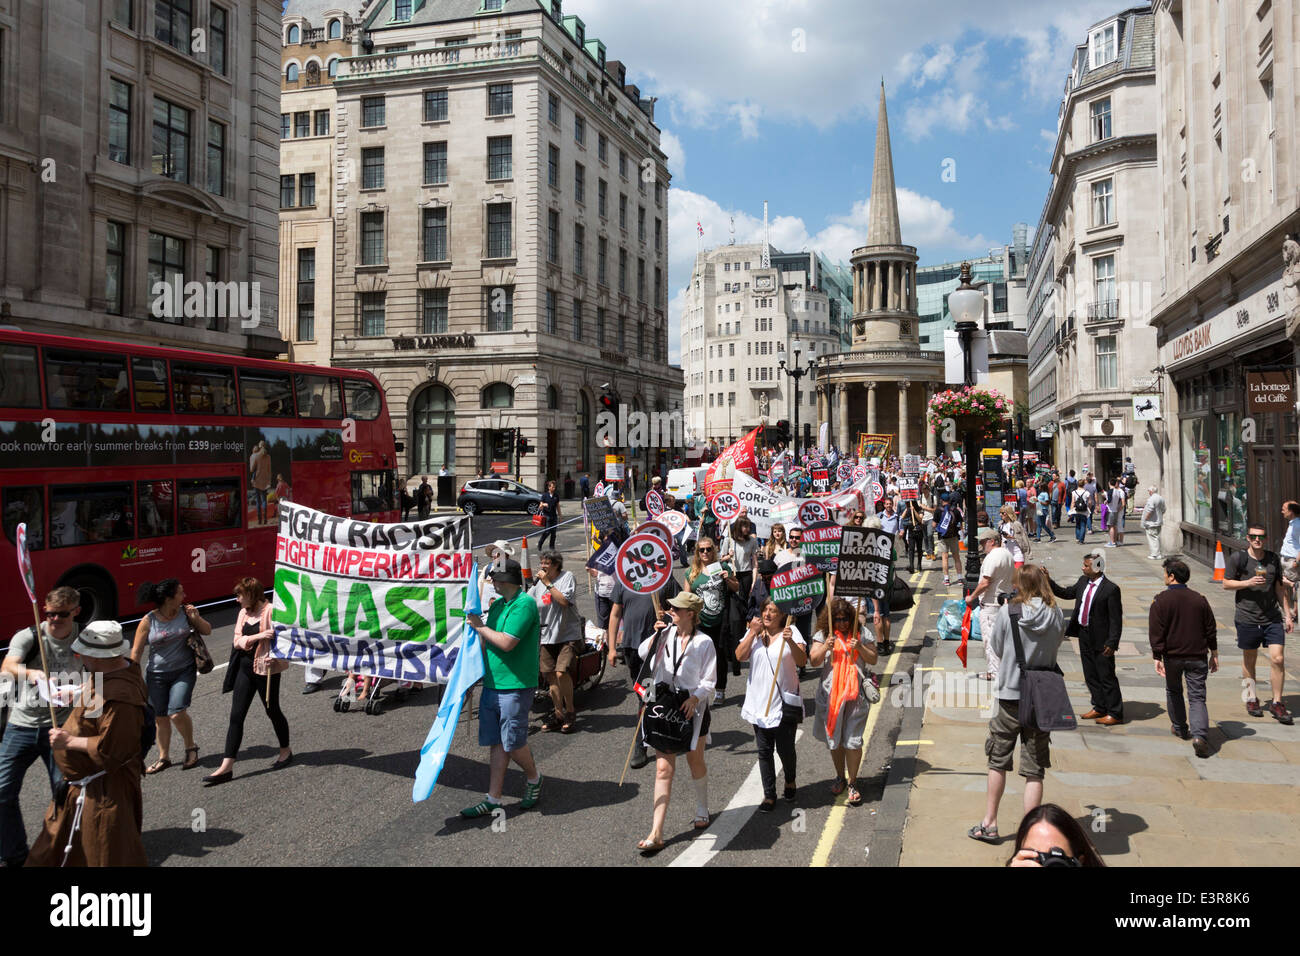 The No More Austerity demonstration & march takes place in Central London. Stock Photo